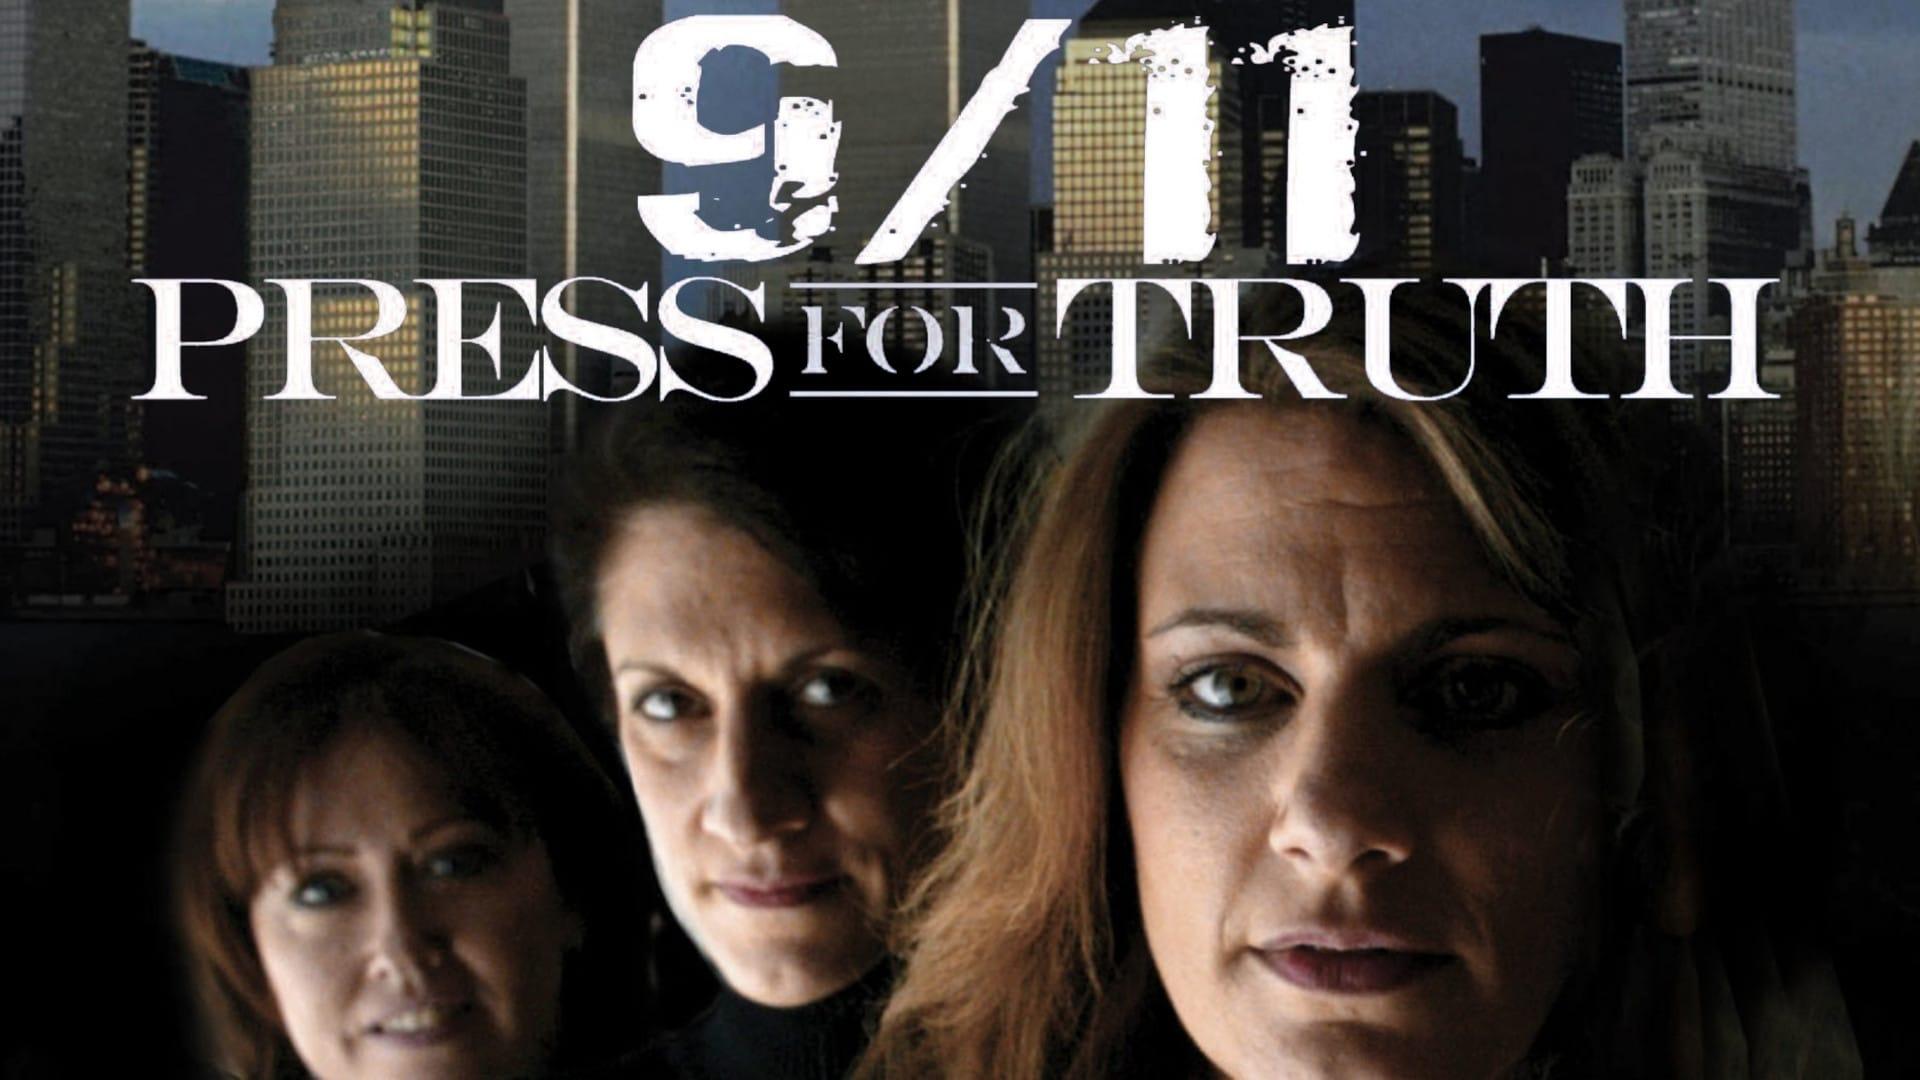 9/11: Press For Truth backdrop